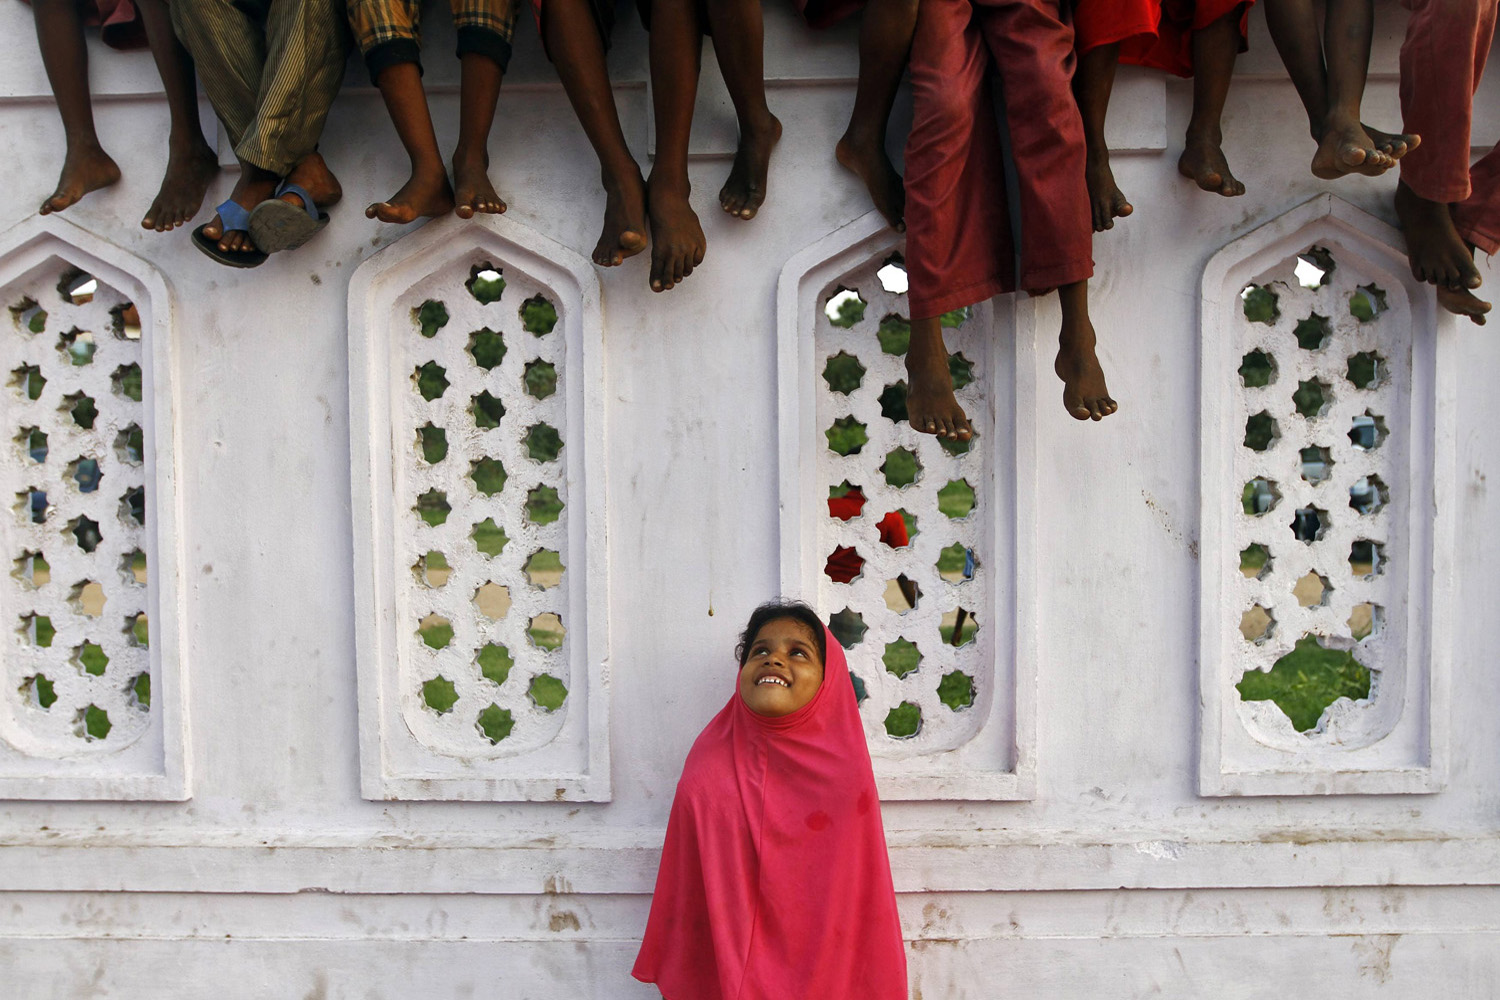 A Muslim girl looks up while some boys sit on a wall, inside the premises of a mosque, as they wait for Iftar (breaking fast) meal during the holy month of Ramadan in the southern Indian city of Chennai